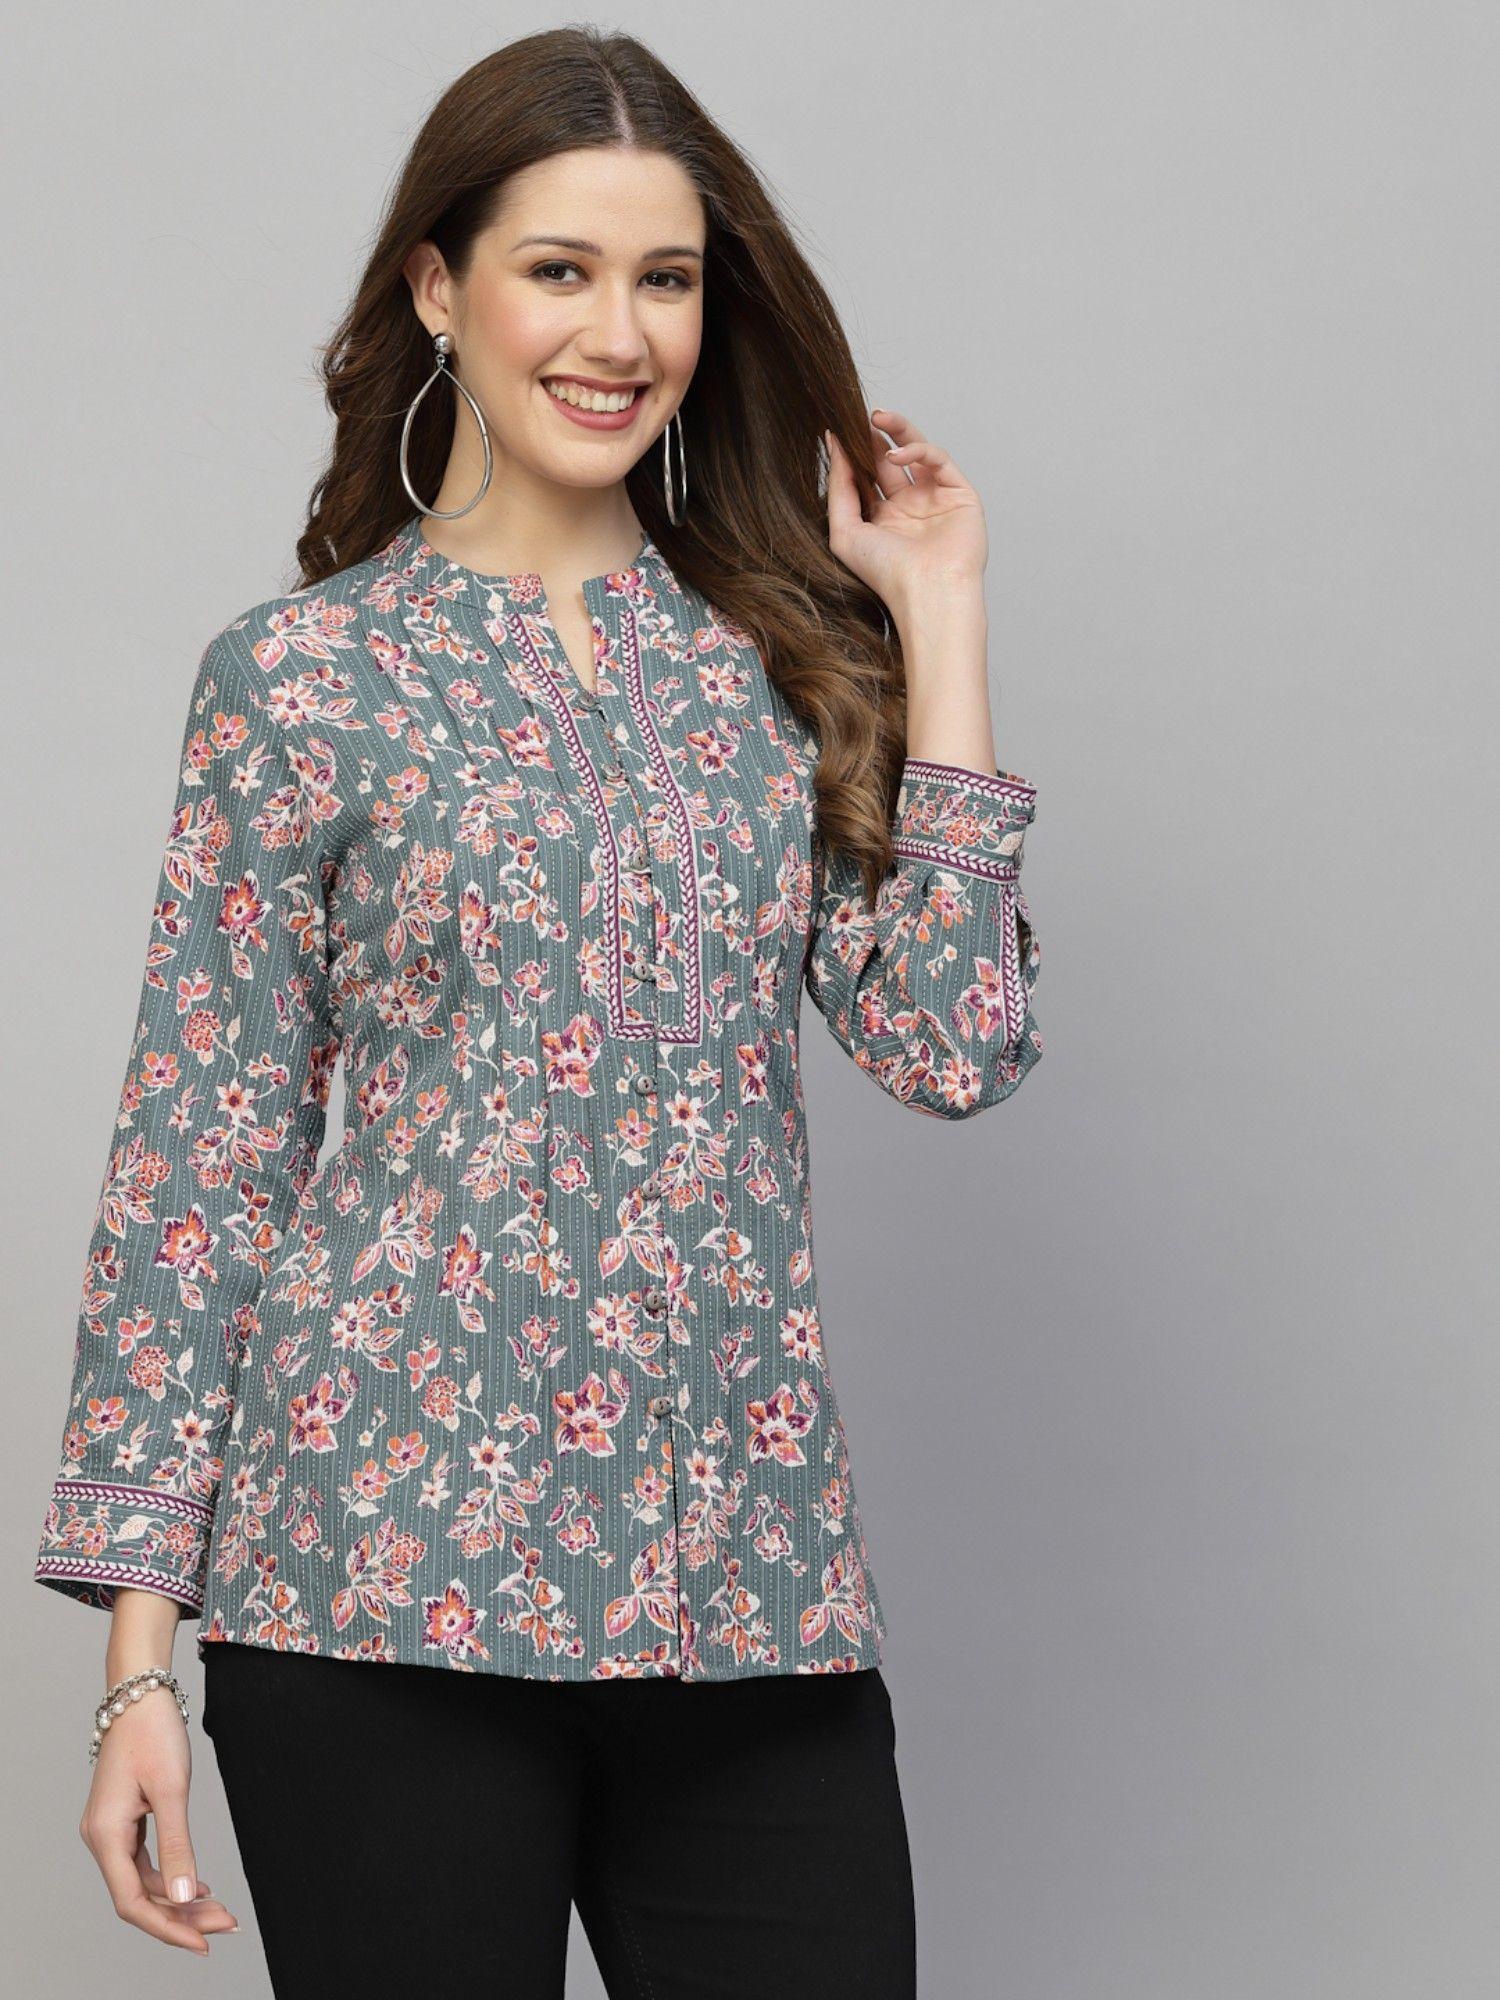 grey floral printed shirt style top